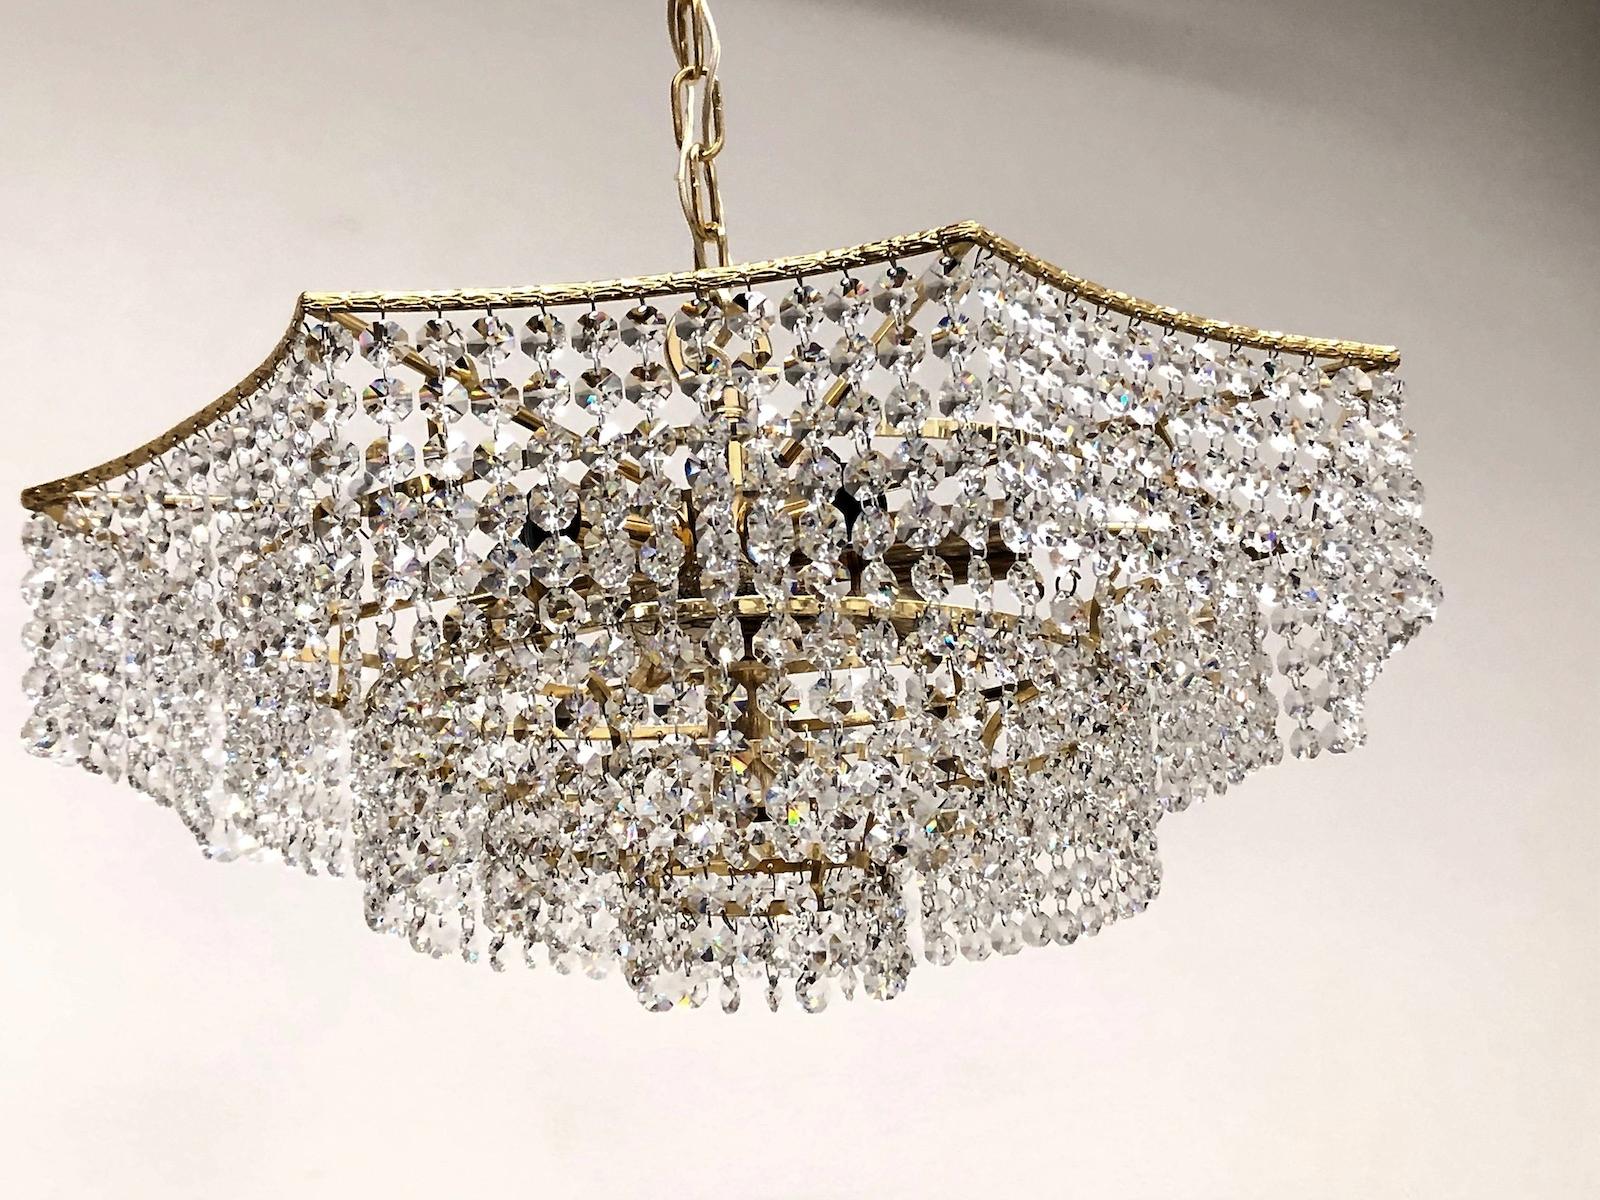 Mid-20th Century Brass and Crystal Glass Waterfall Chandelier, Richard Essig, Germany, 1960s For Sale